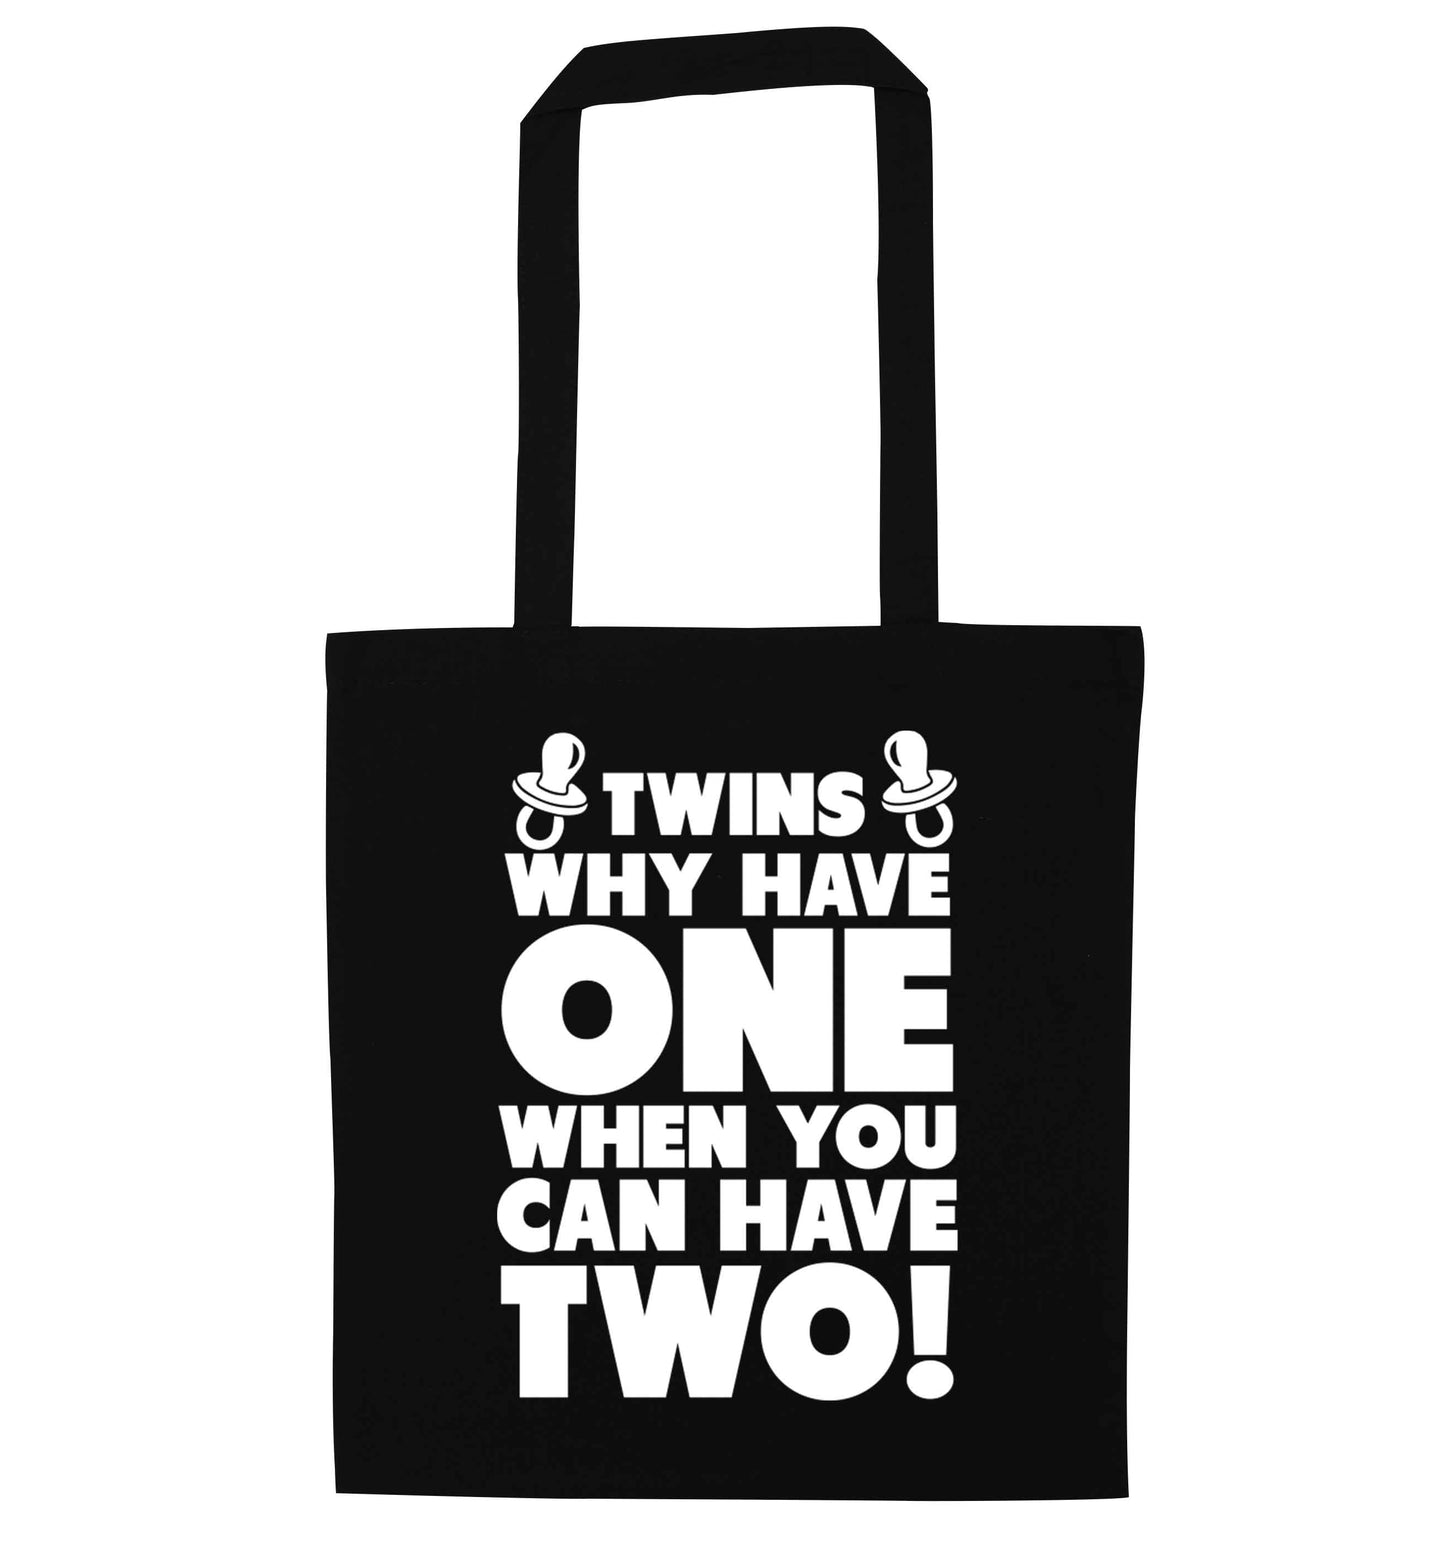 Twins why have one when you can have two black tote bag